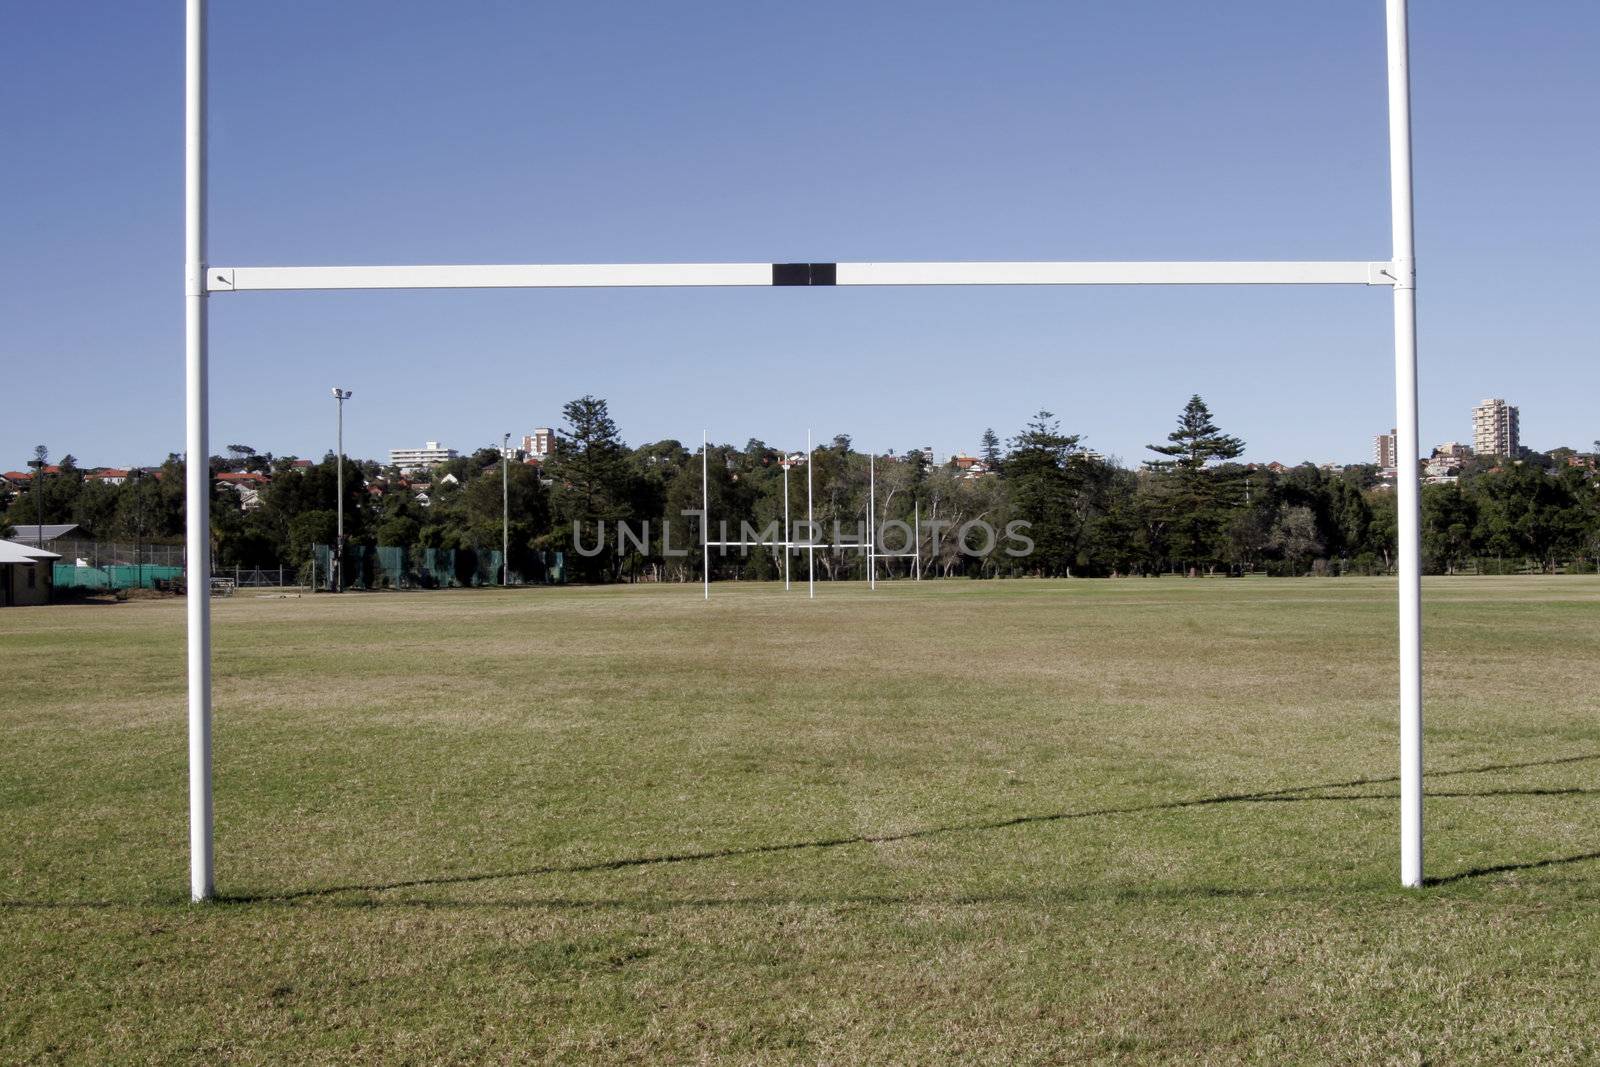 Rugby Field - Goal - Outdoor Sports Ground